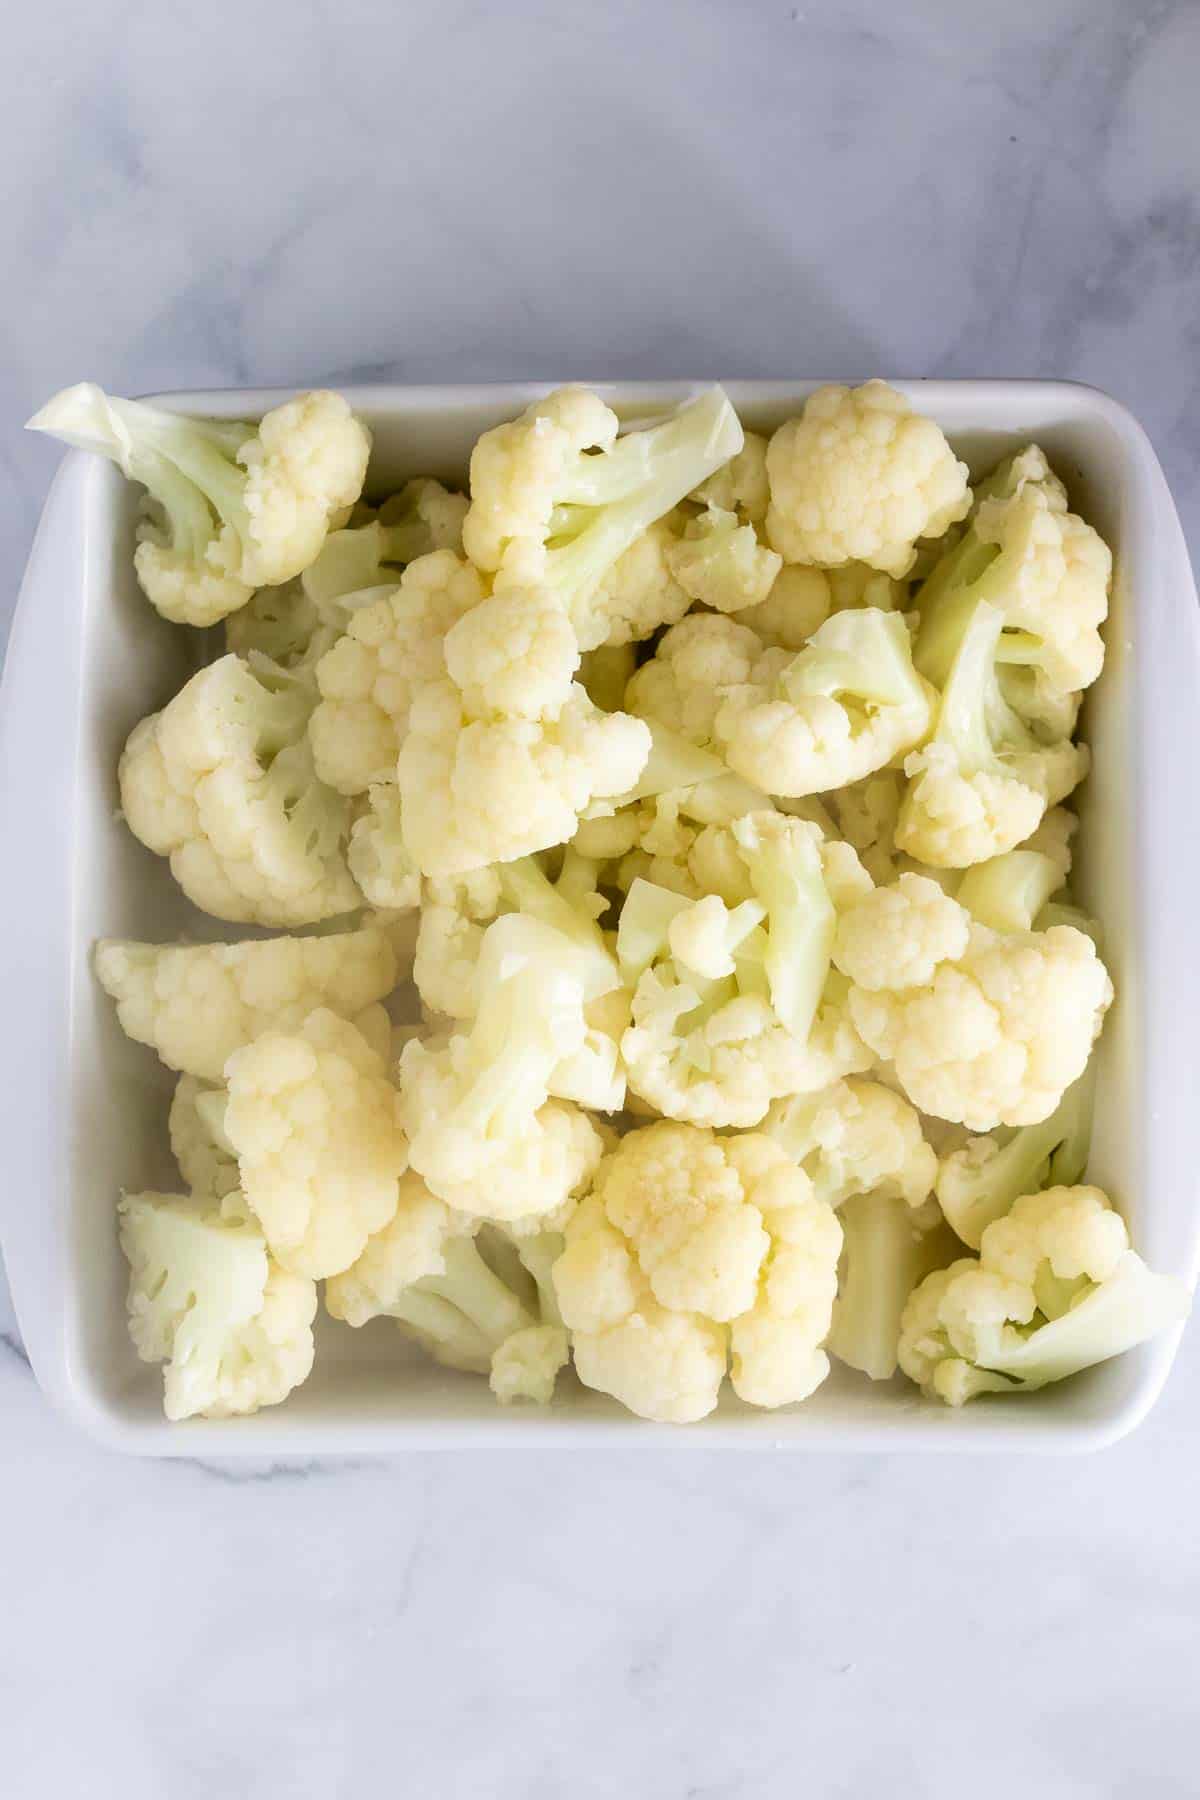 Cooked cauliflower in an 8x8 square baking dish